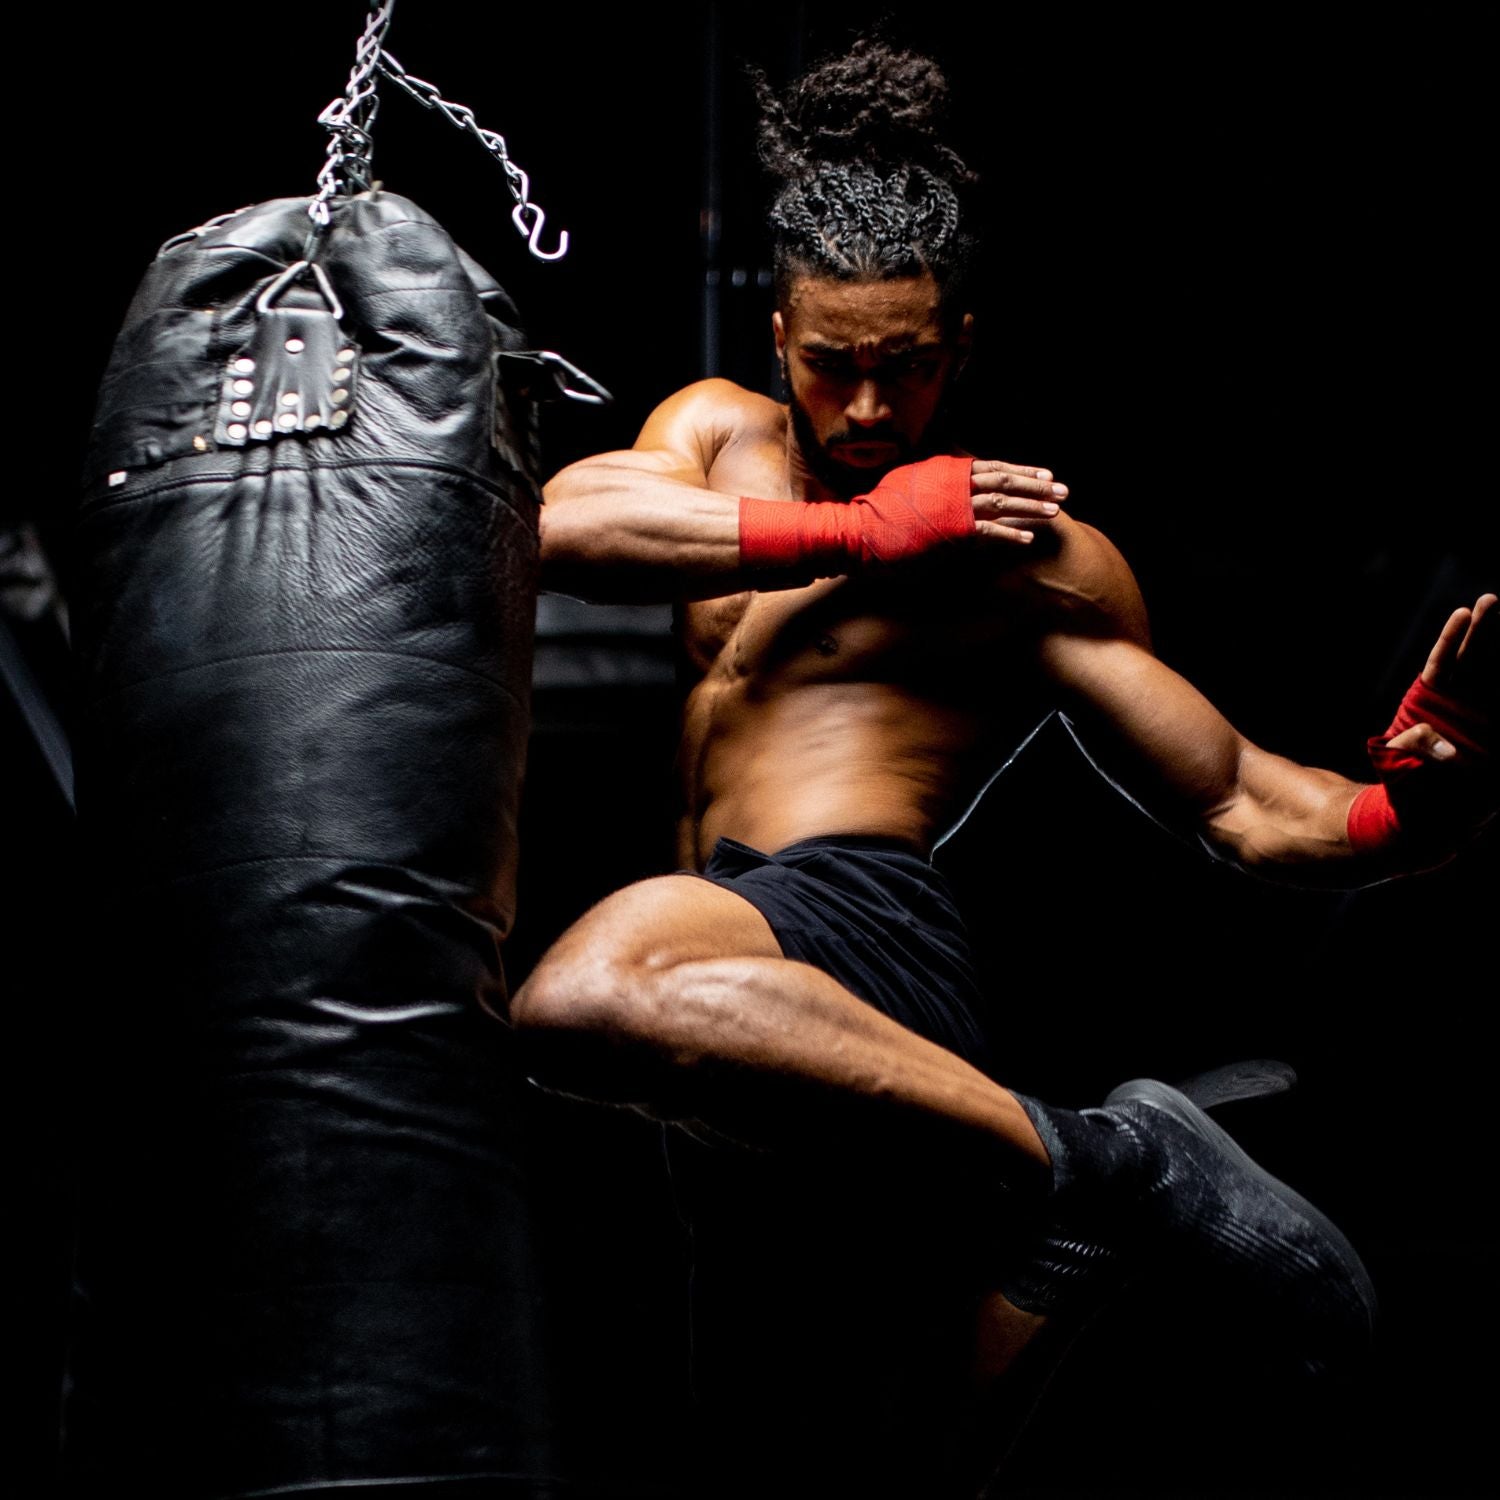 Athlete kicking a heavy bag with their knee showing the strength and resilience of the product